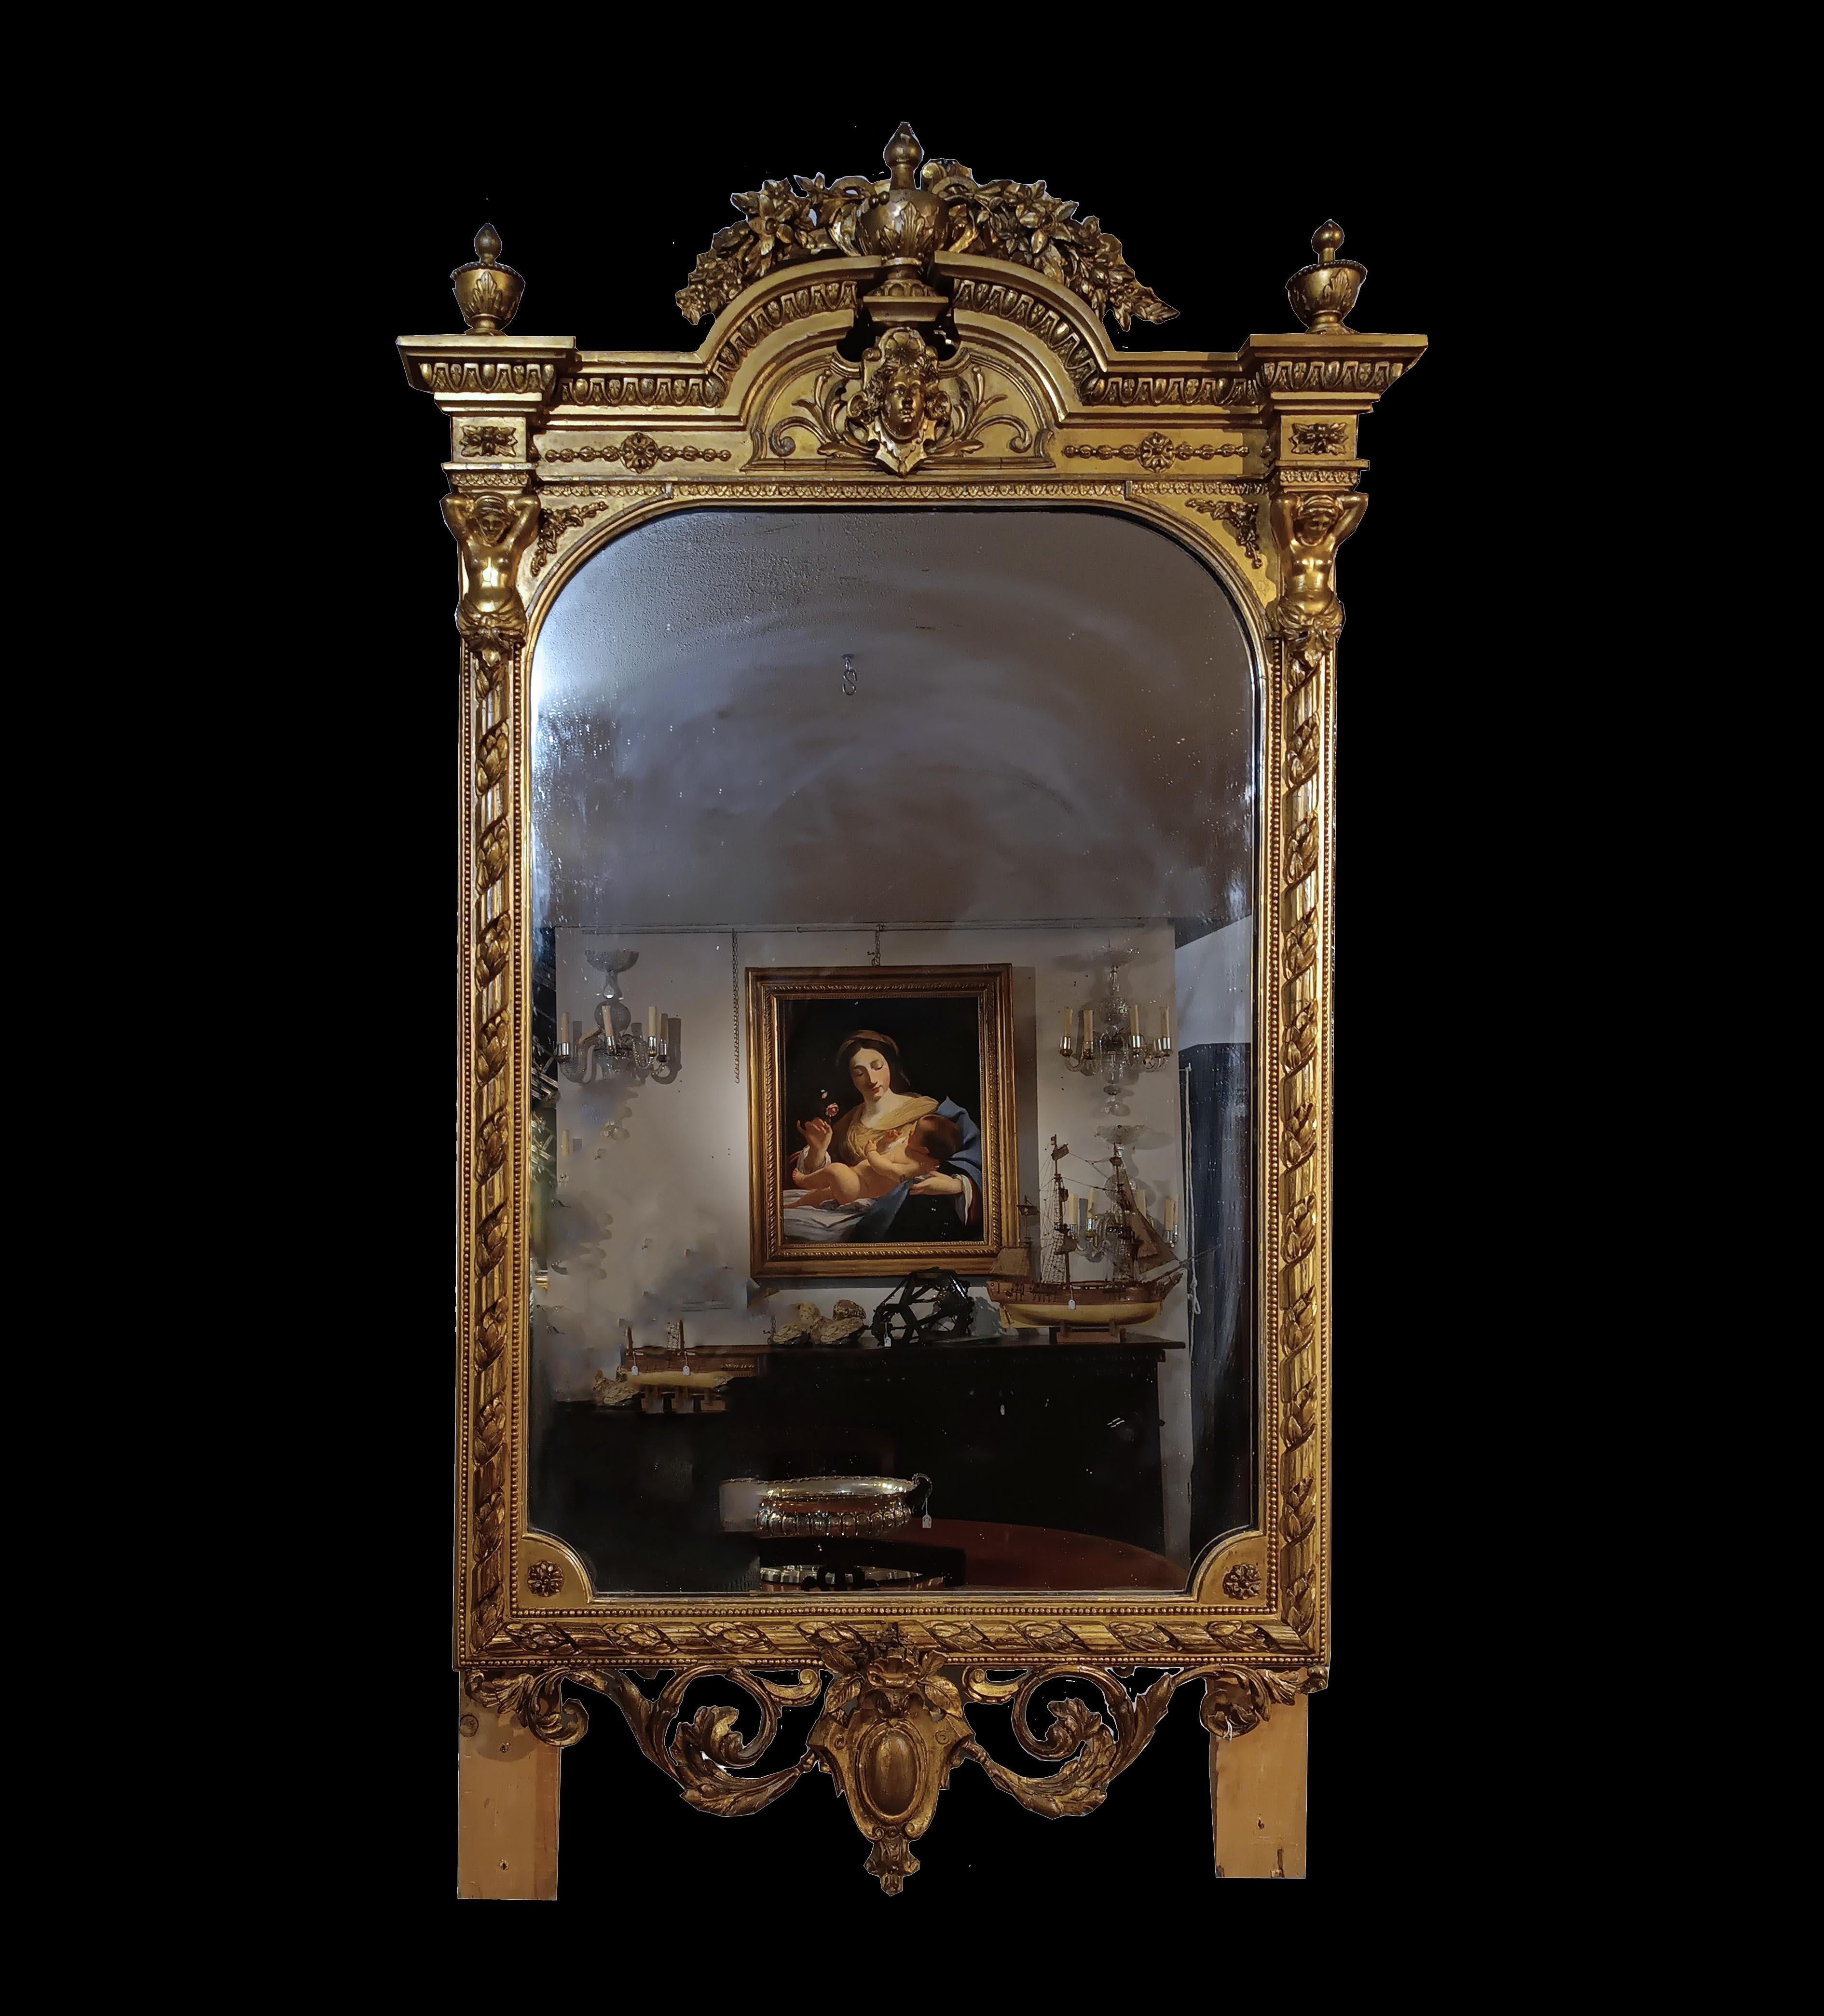 END OF THE 18th CENTURY GOLDEN MIRROR WITH CARYATIDS For Sale 5